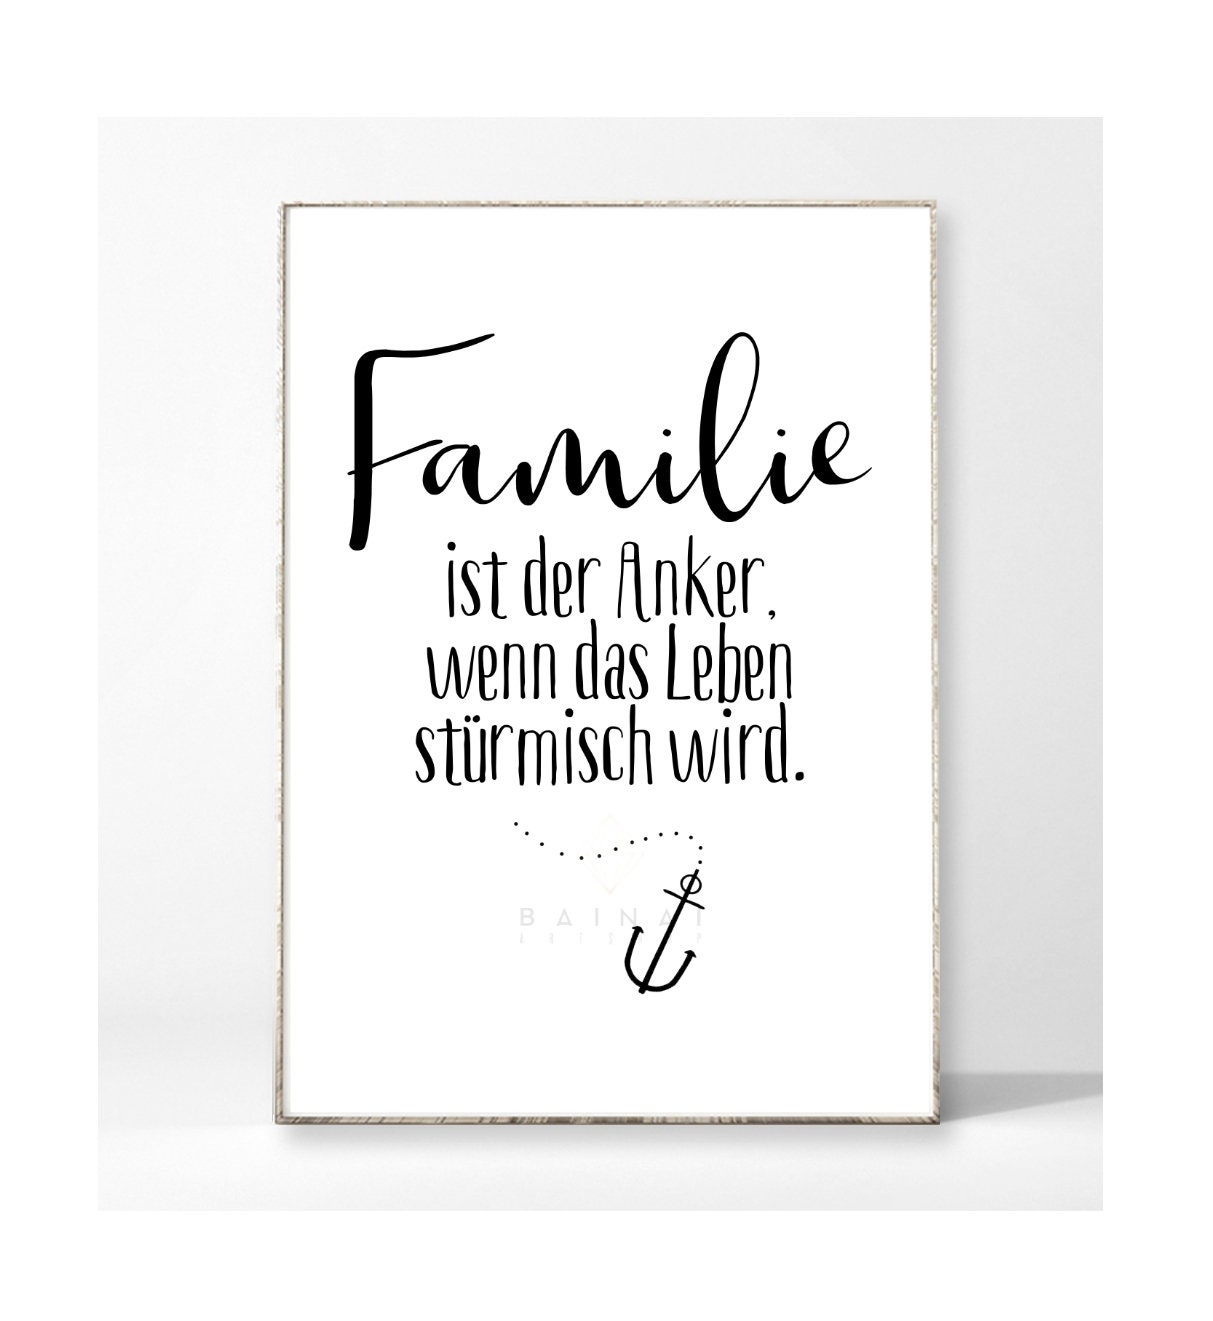 FAMILY ANKER Art Print Poster Image Typography Saying Cursive Etsy